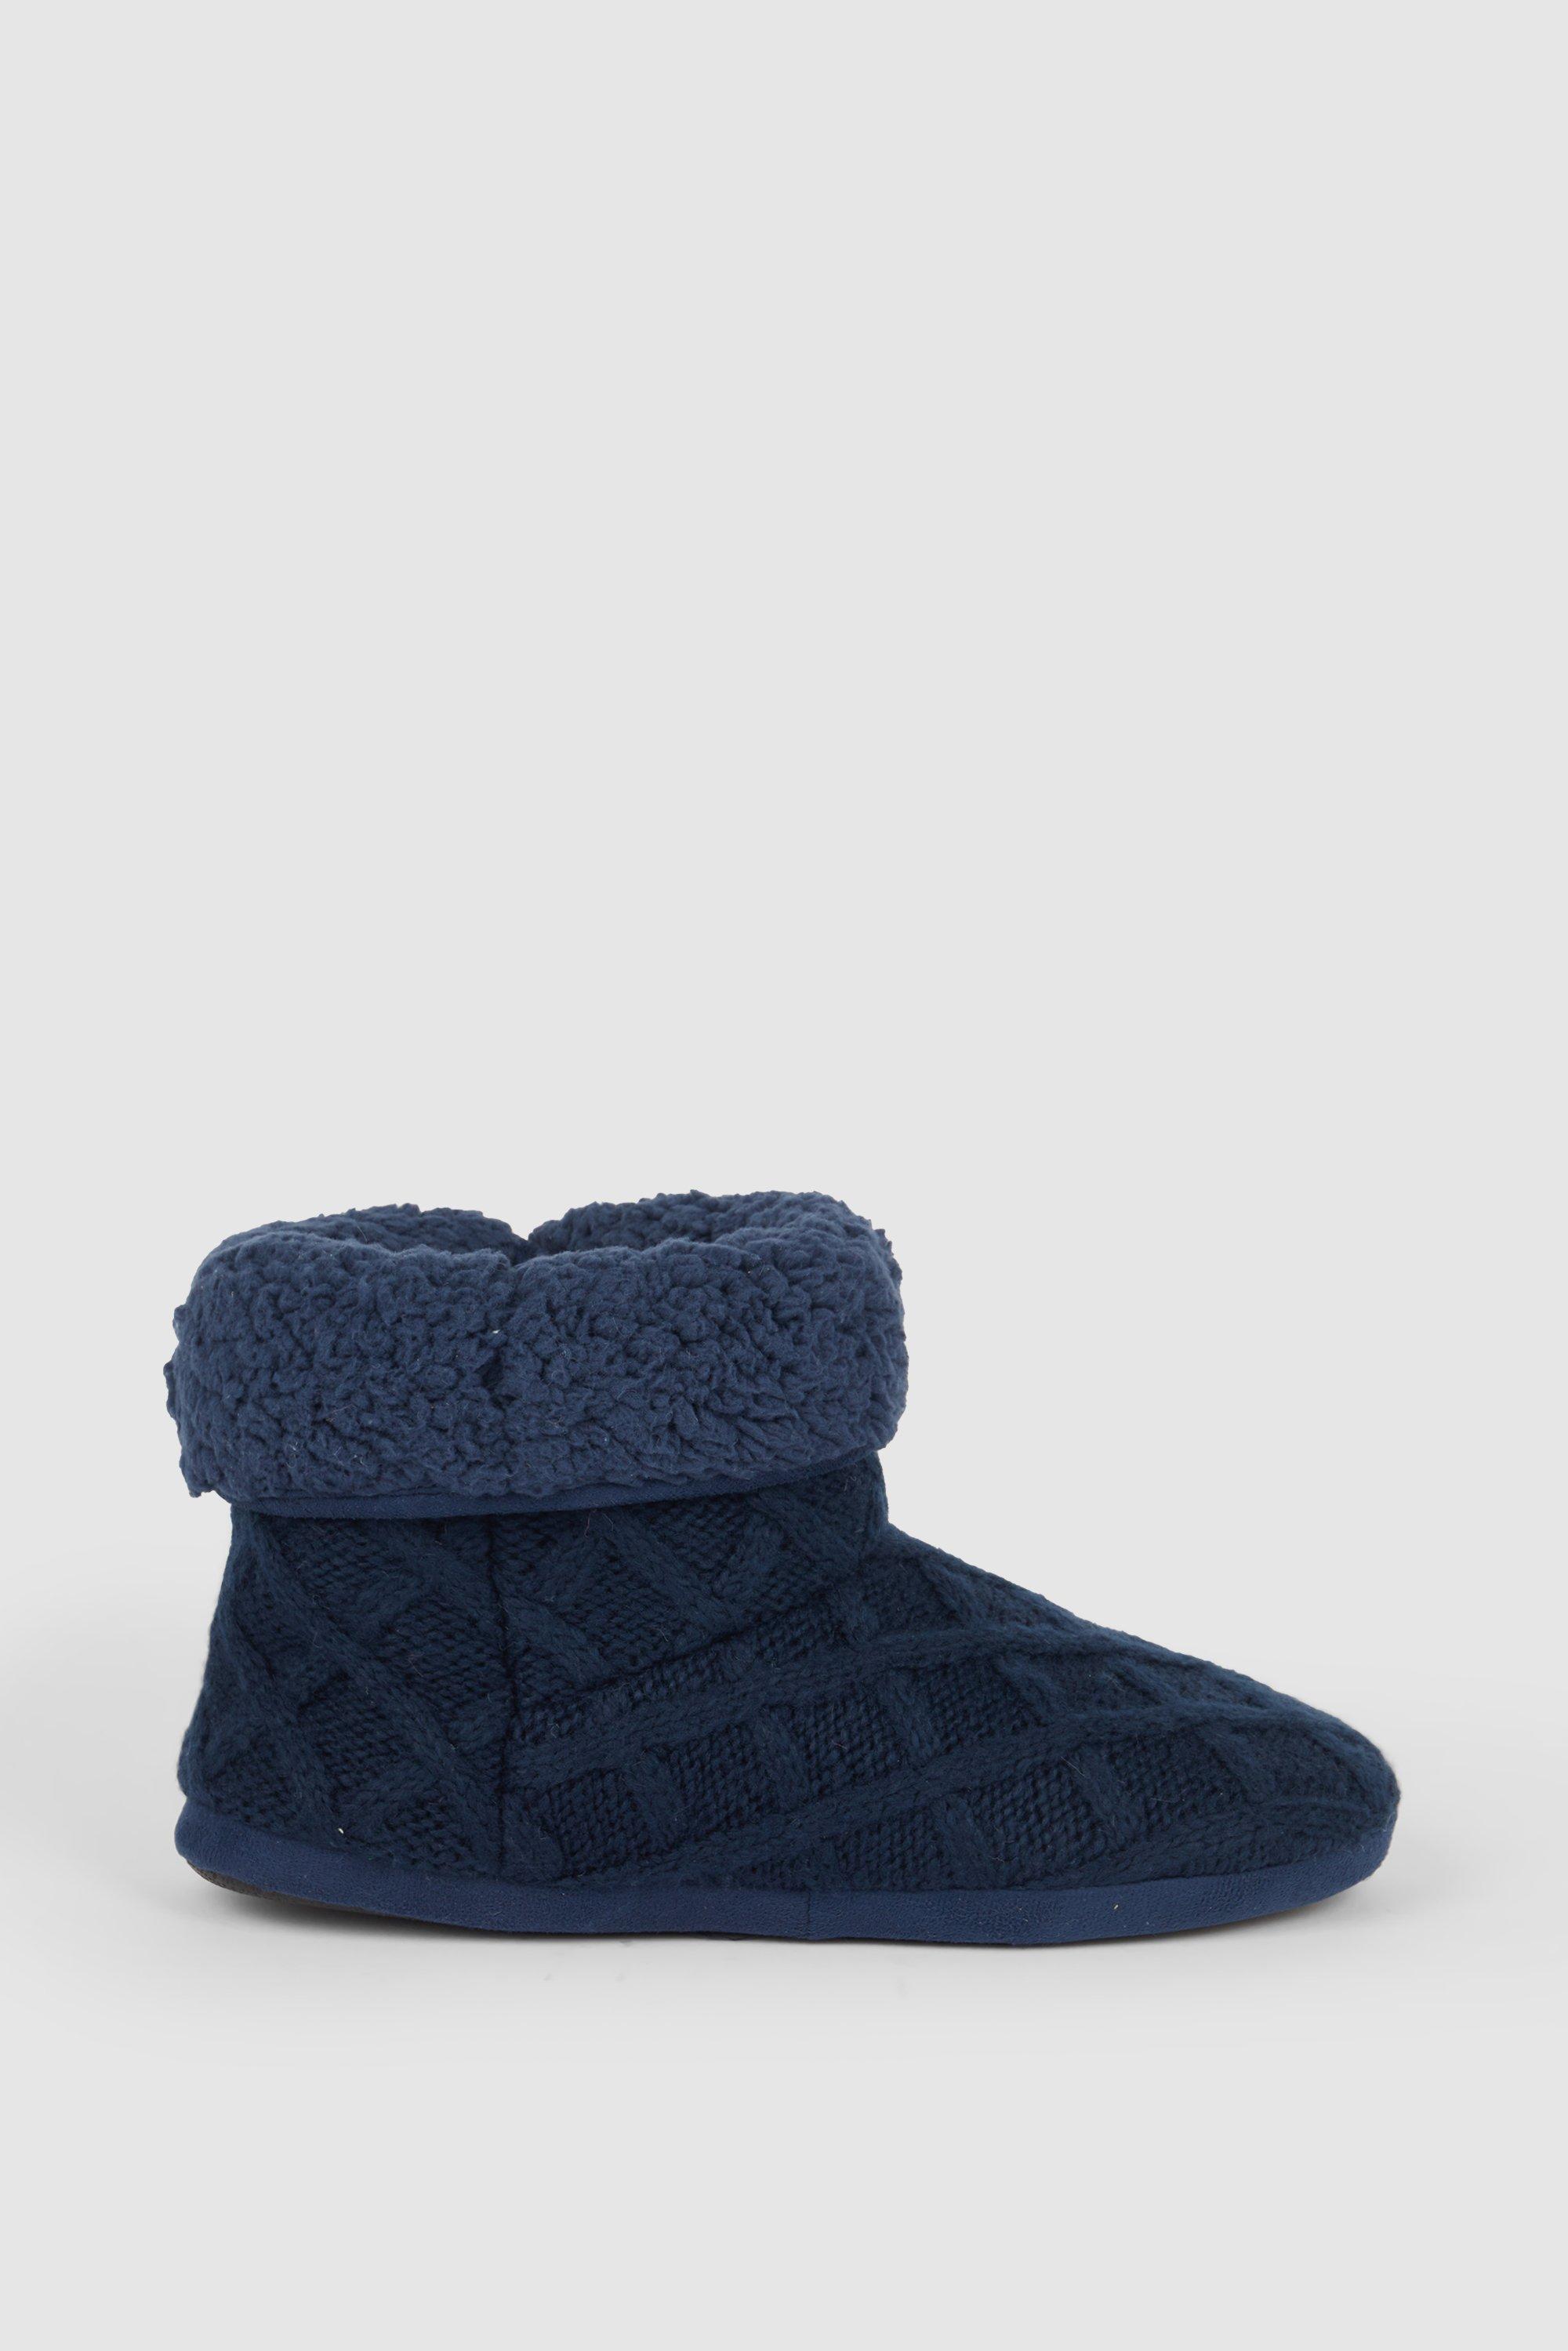 Cross Hatch Knitted Boot